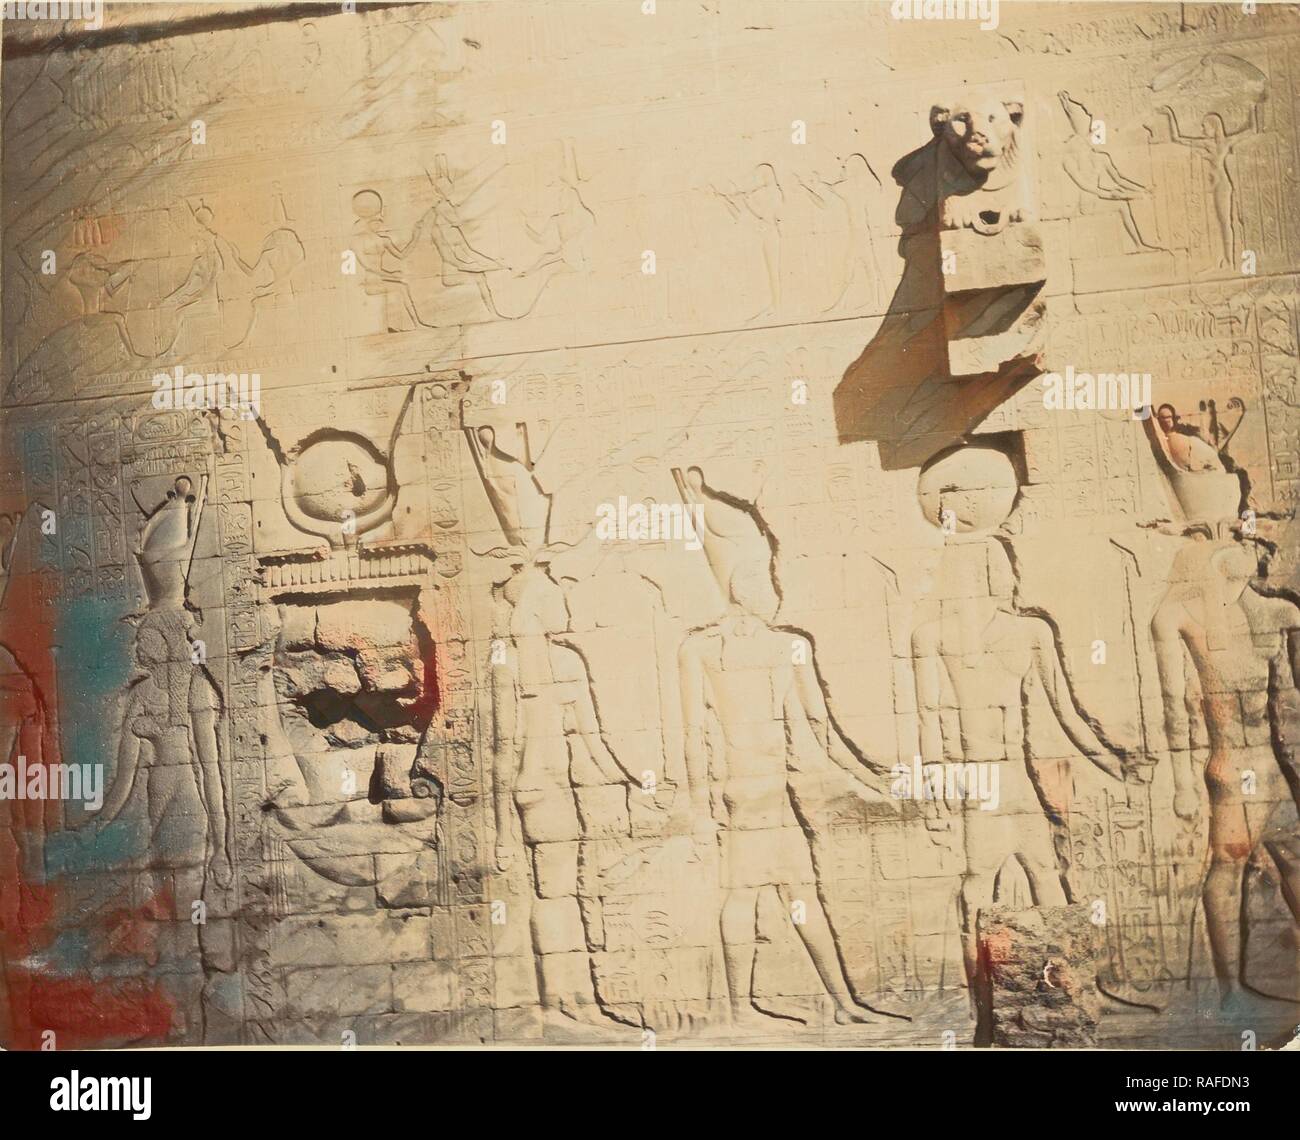 Egyptian Figures High Resolution Stock Photography and Images - Alamy